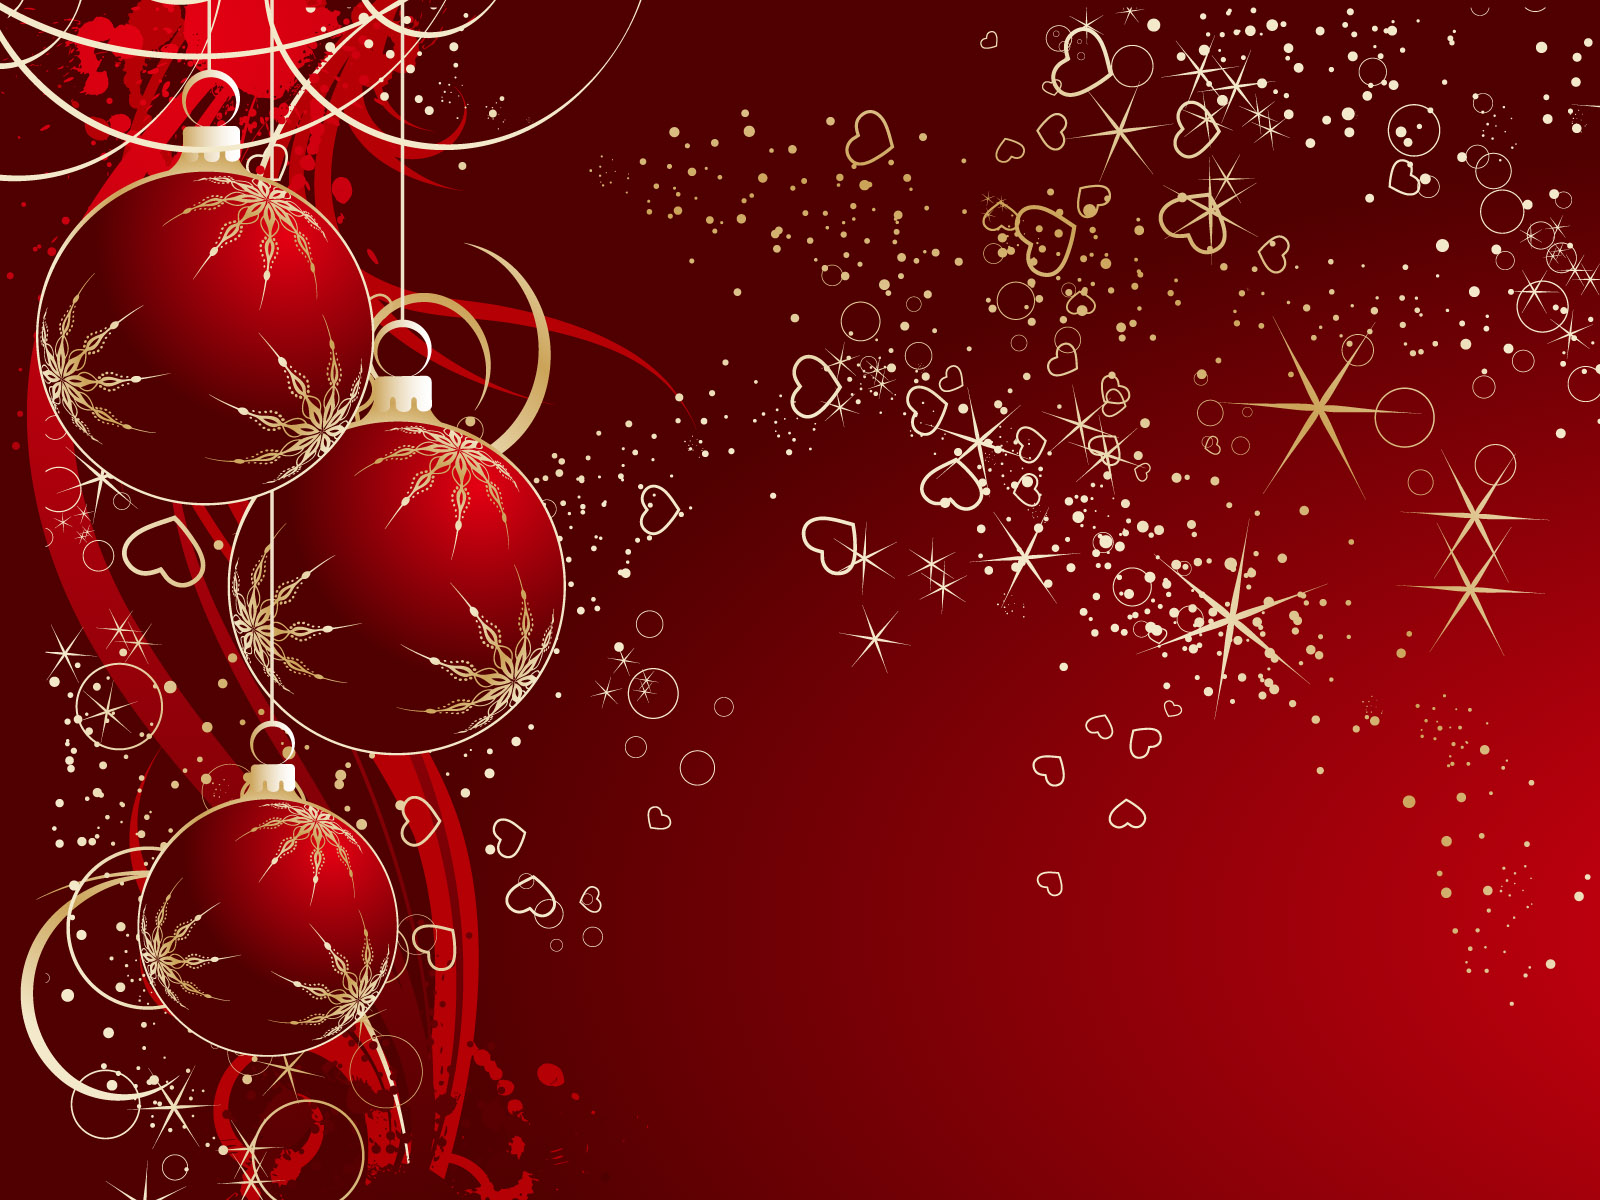 Red And White Christmas Wallpaper Wide HD